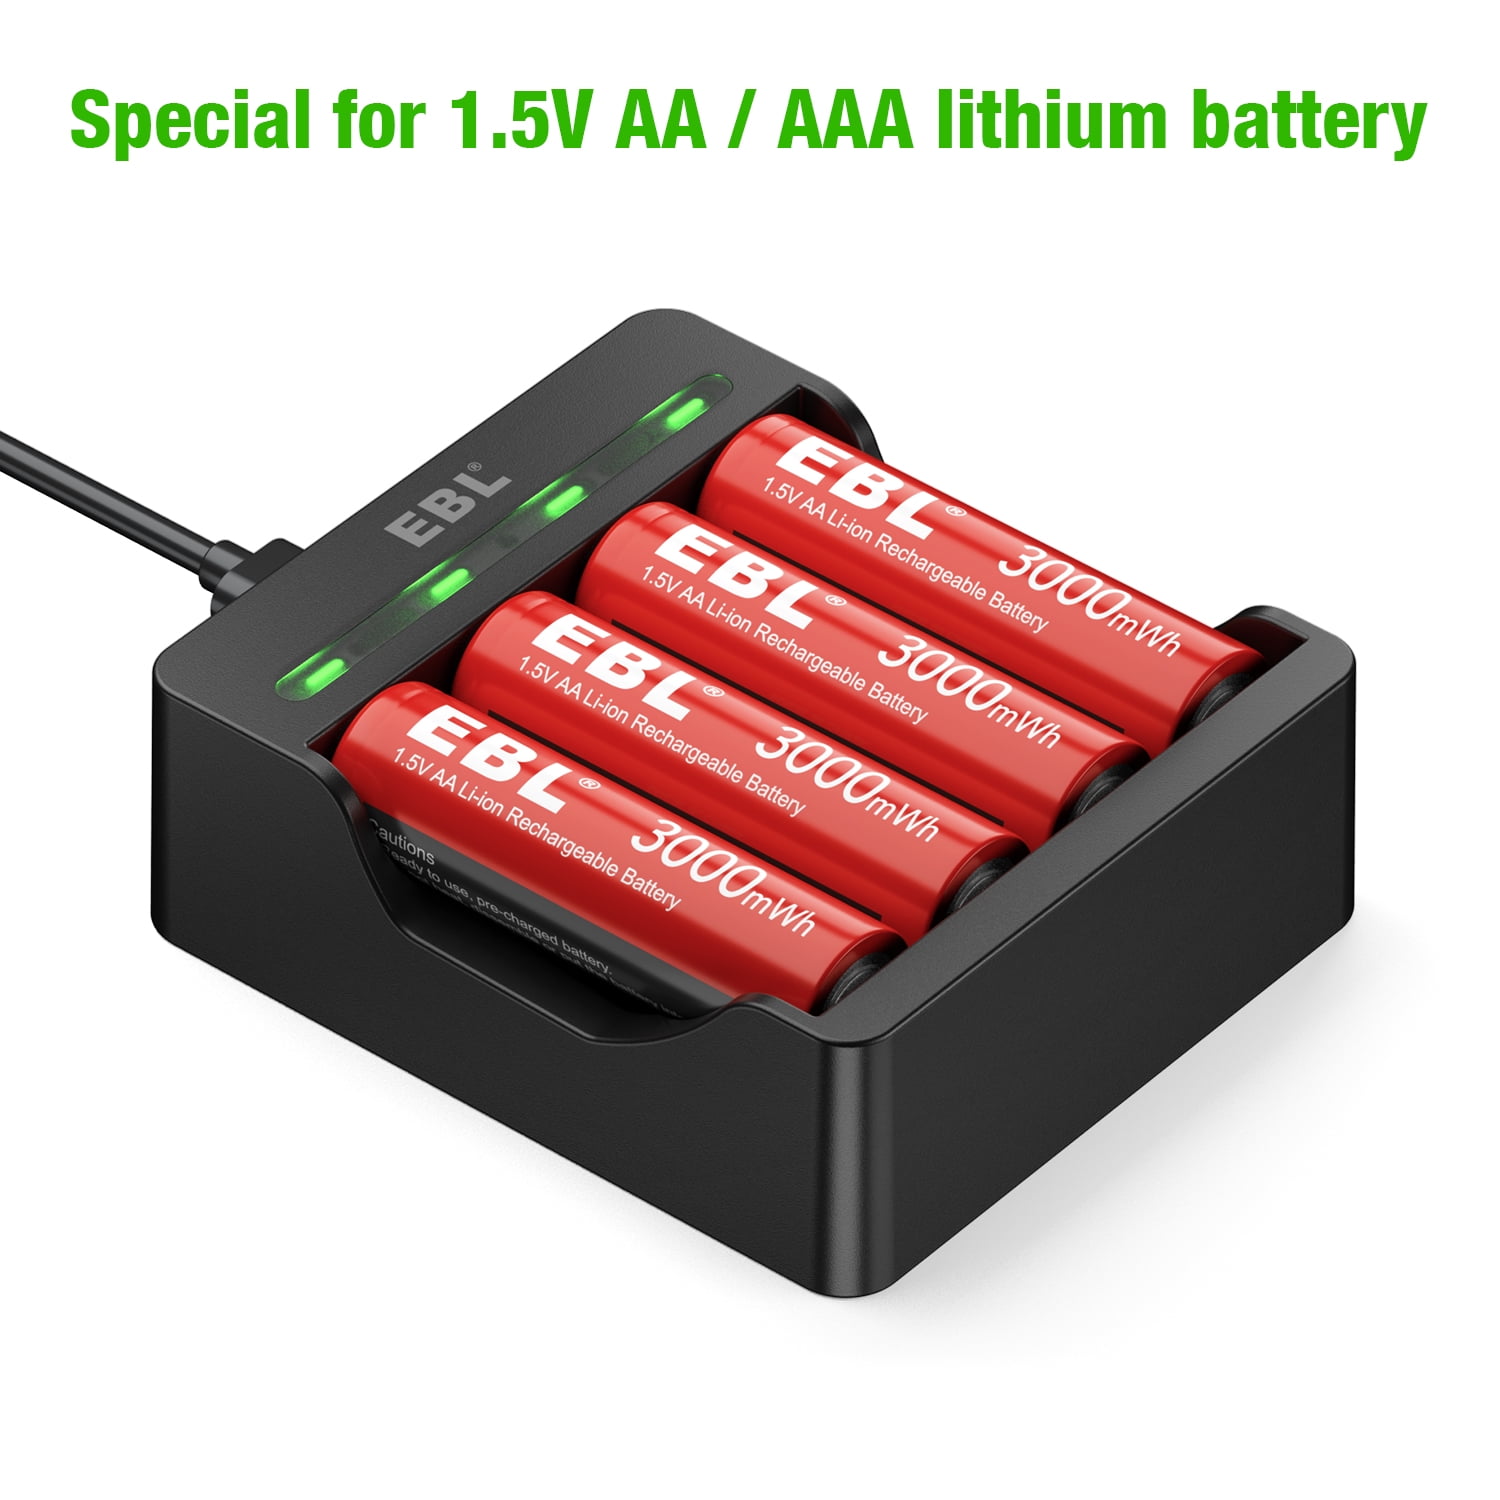 EBL AA Lithium Batteries, 1.5V 3000mWh Rechargeable AA Batteries Long  Lasting Double A Battery 8 Pack